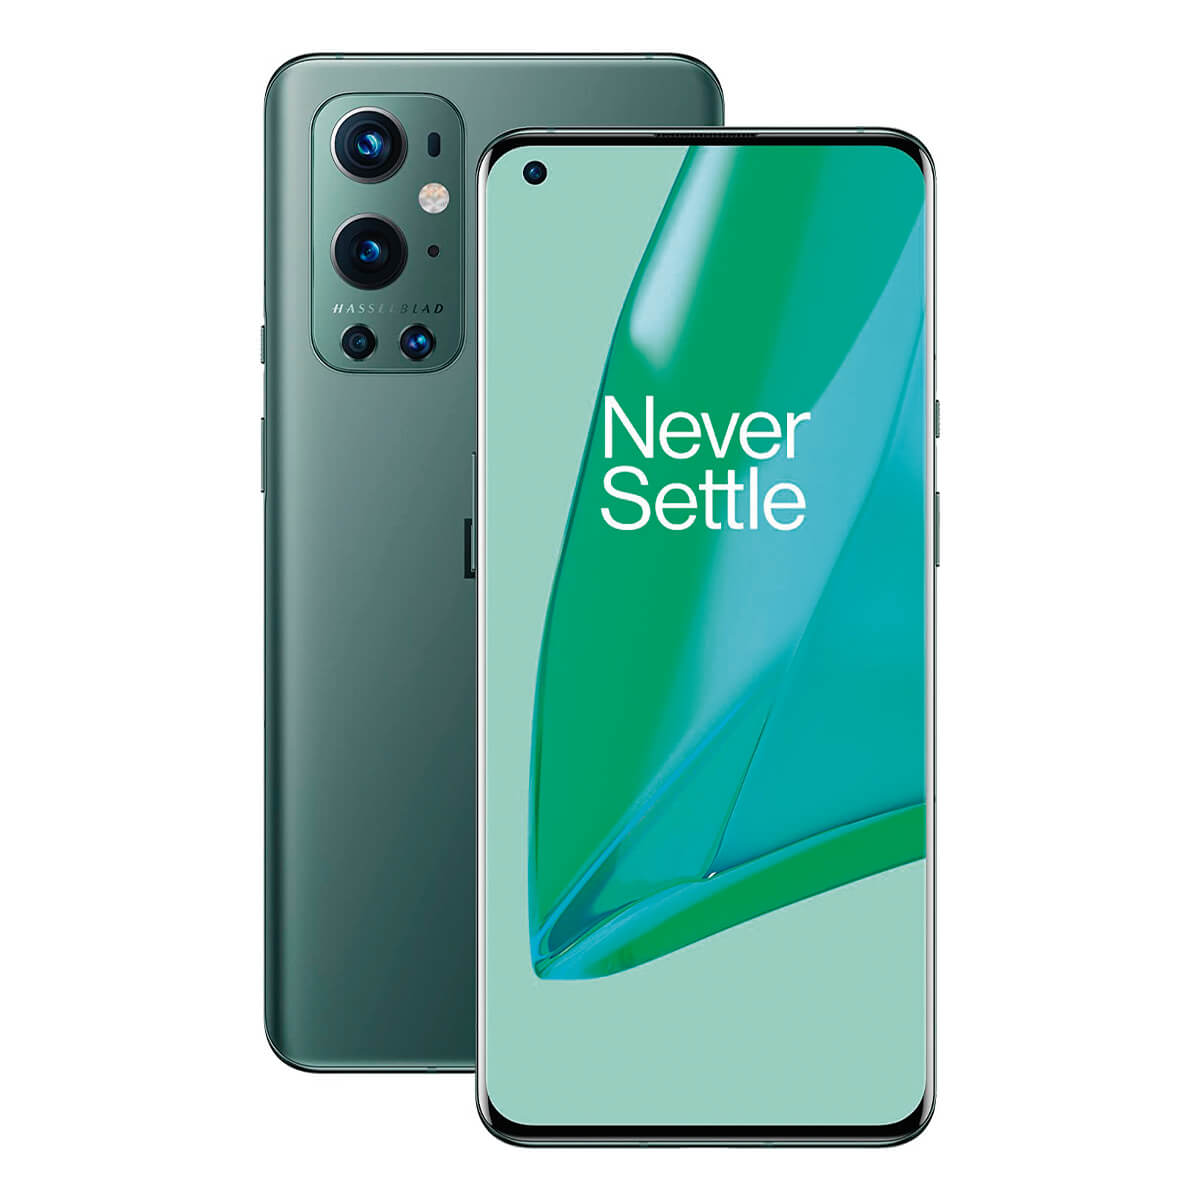 ONEPLUS 9 PRO 5G 12GB/256GB VERDE (FOREST GREEN) DUAL SIM | Móviles libres